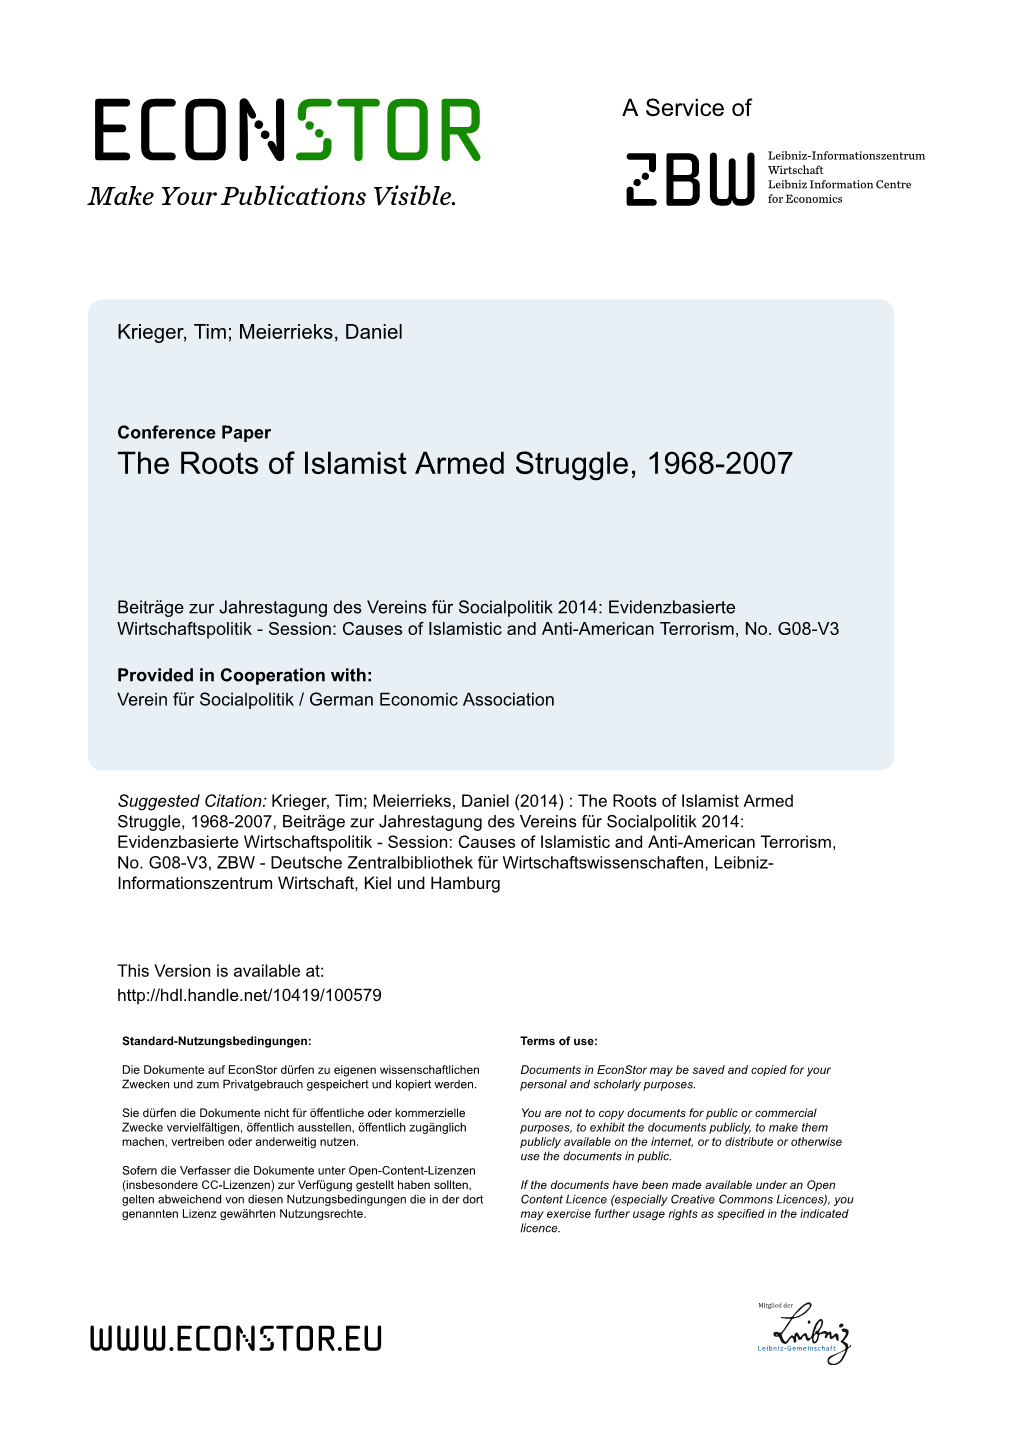 The Roots of Islamist Armed Struggle, 1968-2007